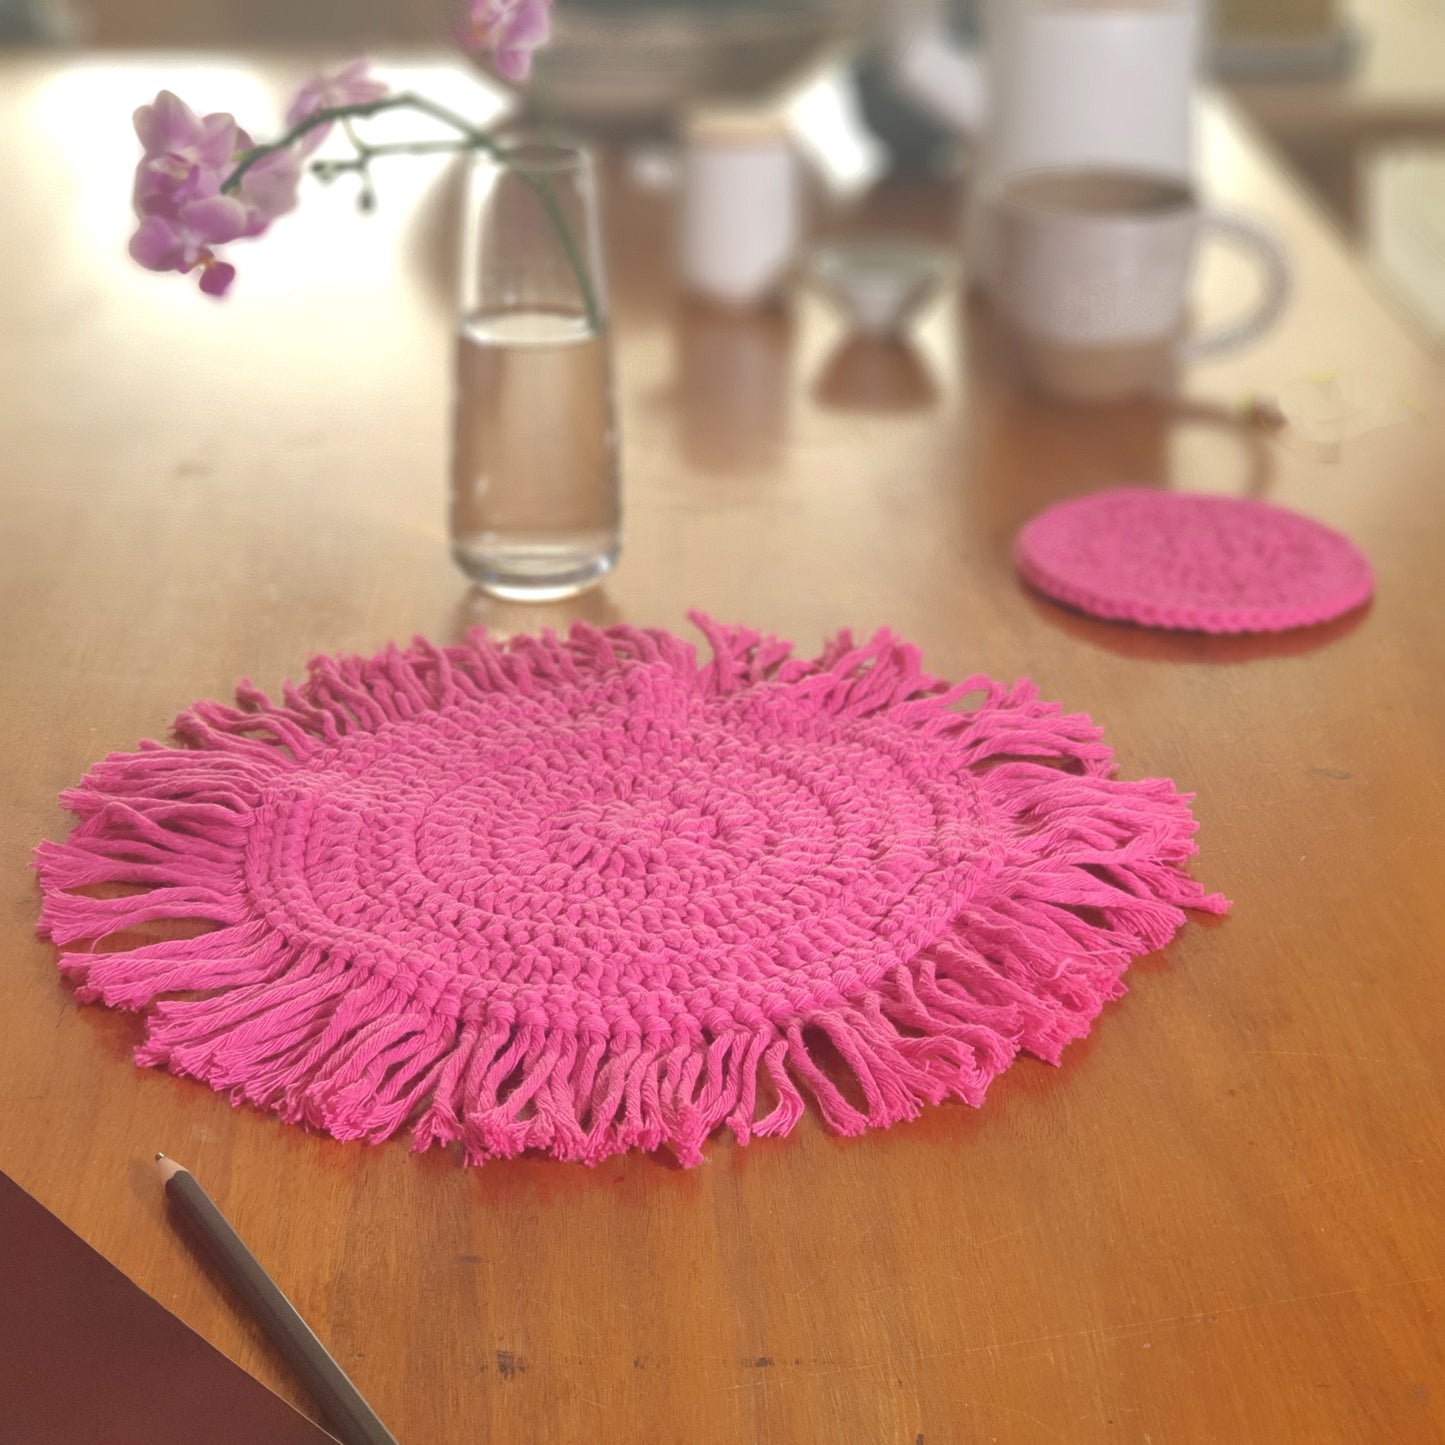 Boho table set in crocheted cotton